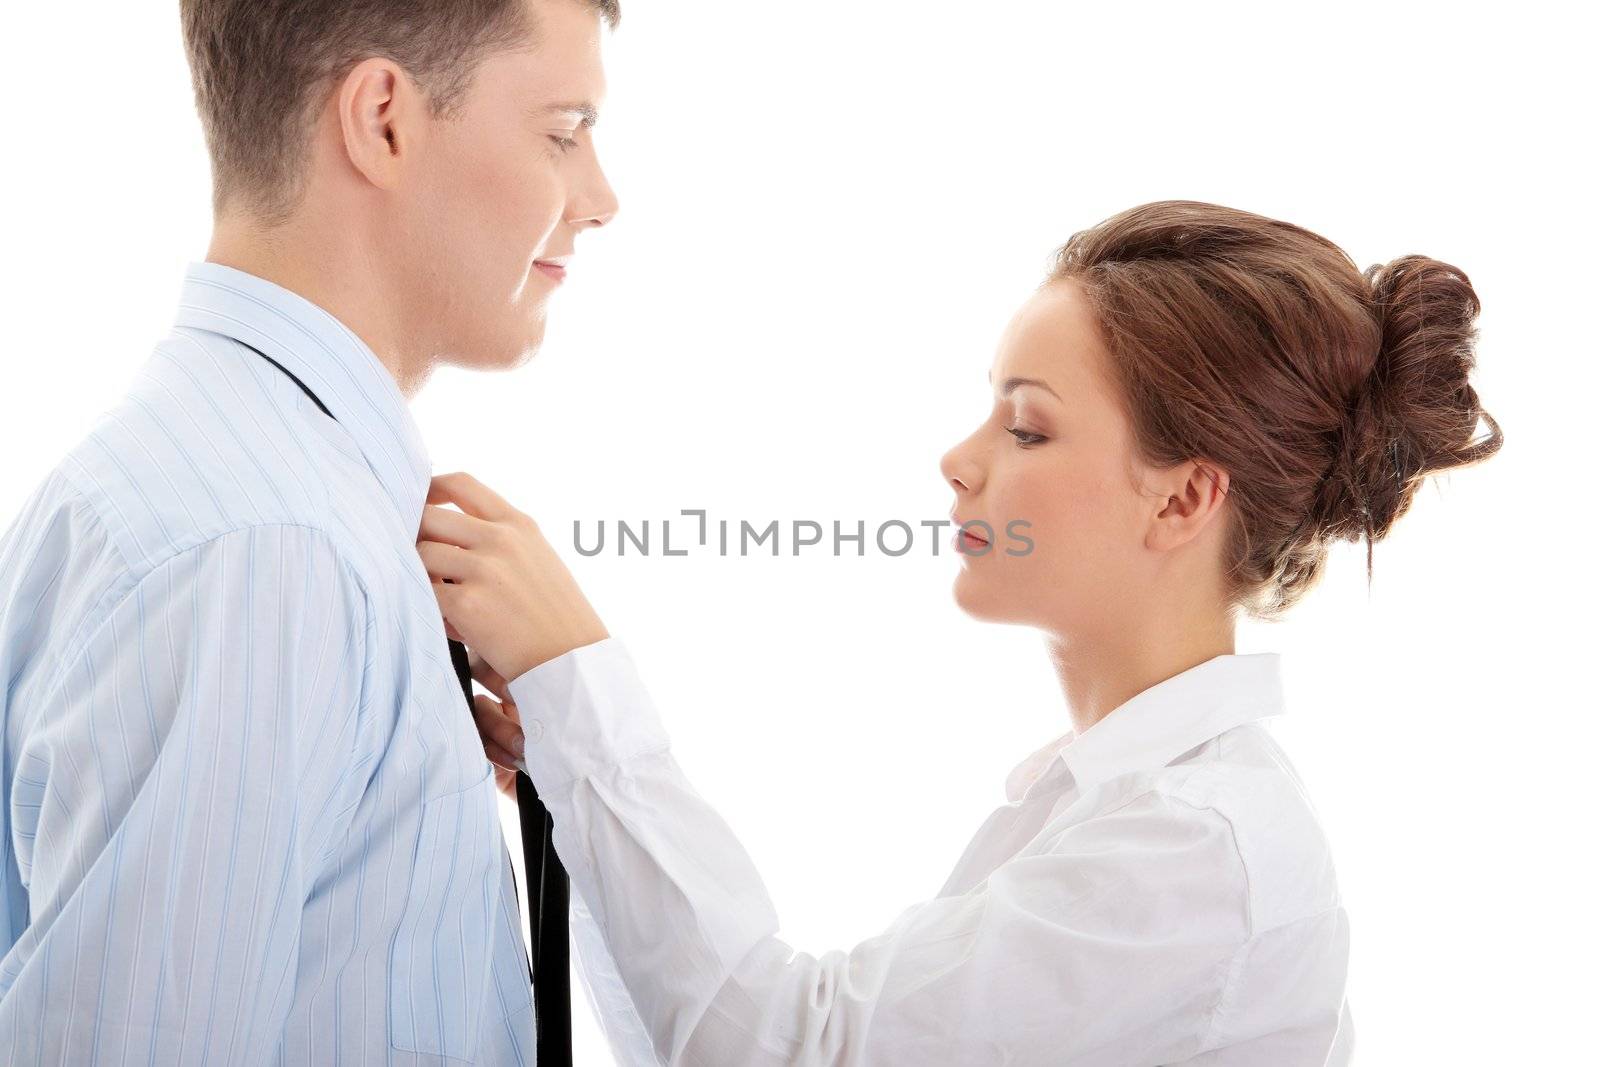 Businesswoman knotting the necktie of the businessman, helping and assisting him getting dressed. Isolated over white.